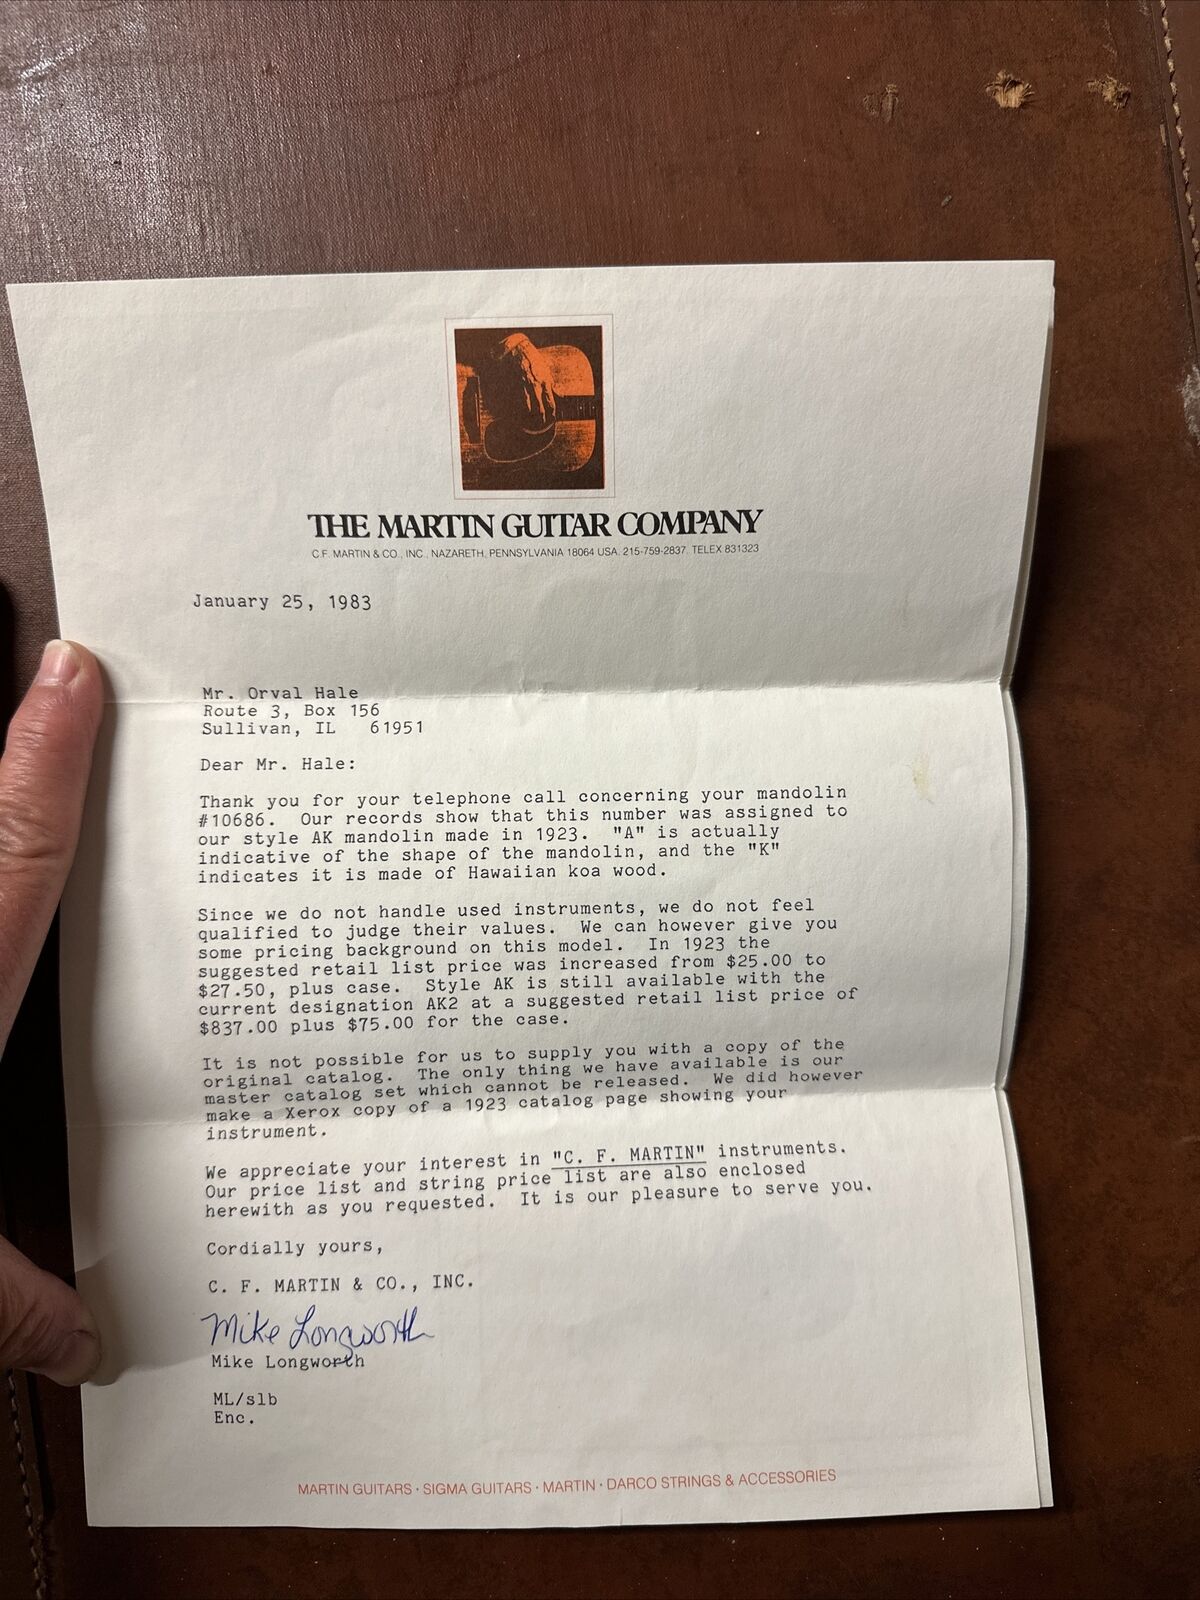 A Letter From The Martin Guitar Company